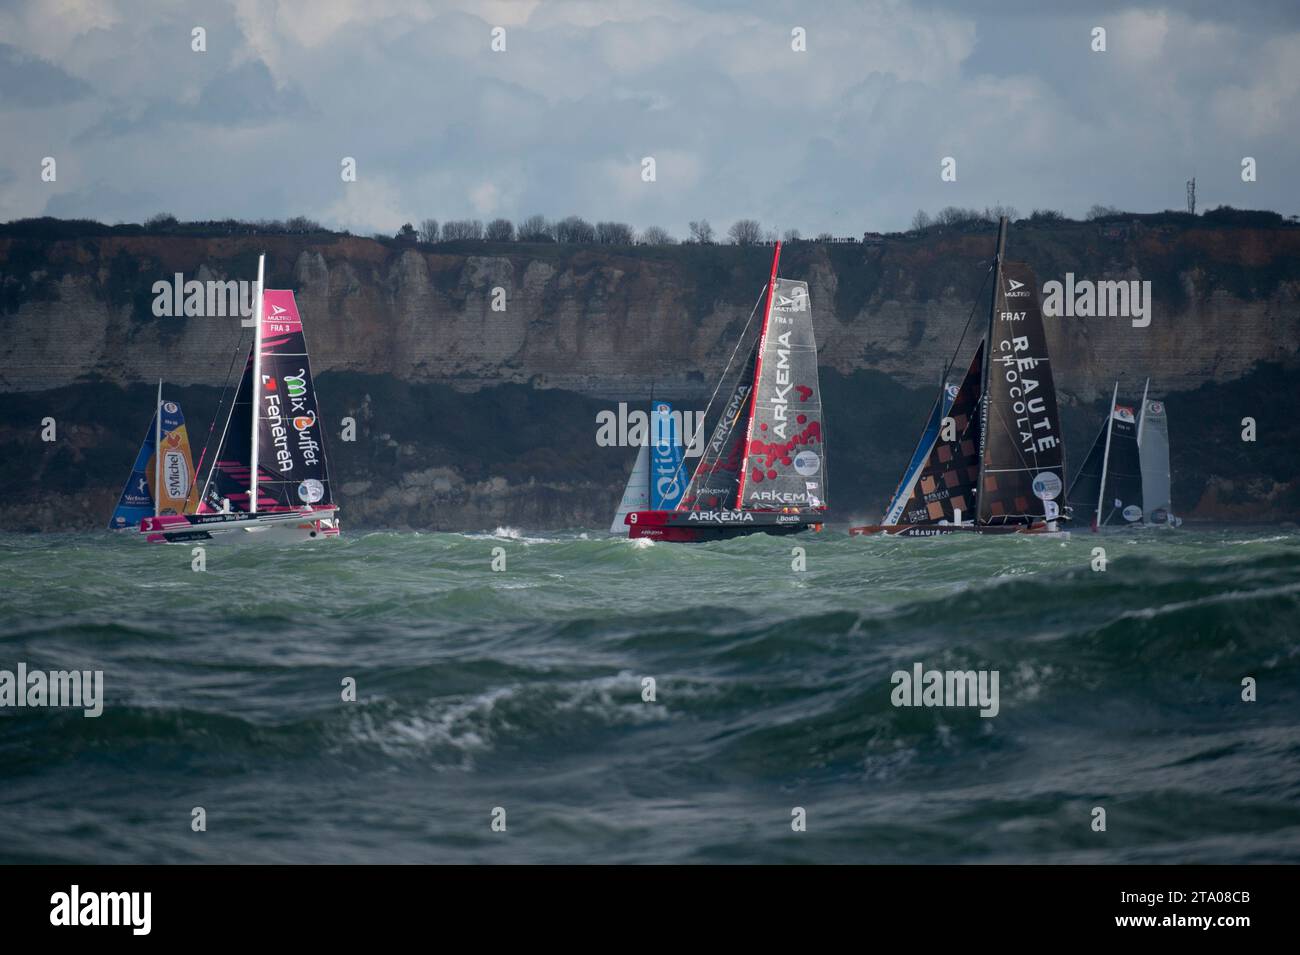 Multi50 Class with FenêtréA Mix Buffet, Erwan LE ROUX and Vincent RIOU, Arkema, Lalou ROUCAYRIOL and Alex PELLA, Réauté Chocolat, Armel TRIPON and Vincent BARNAUD during the start of the Transat Jacques Vabre sailing race on November 5, 2017 at Le Havre, France - Photo Olivier Blanchet / DPPI Stock Photo